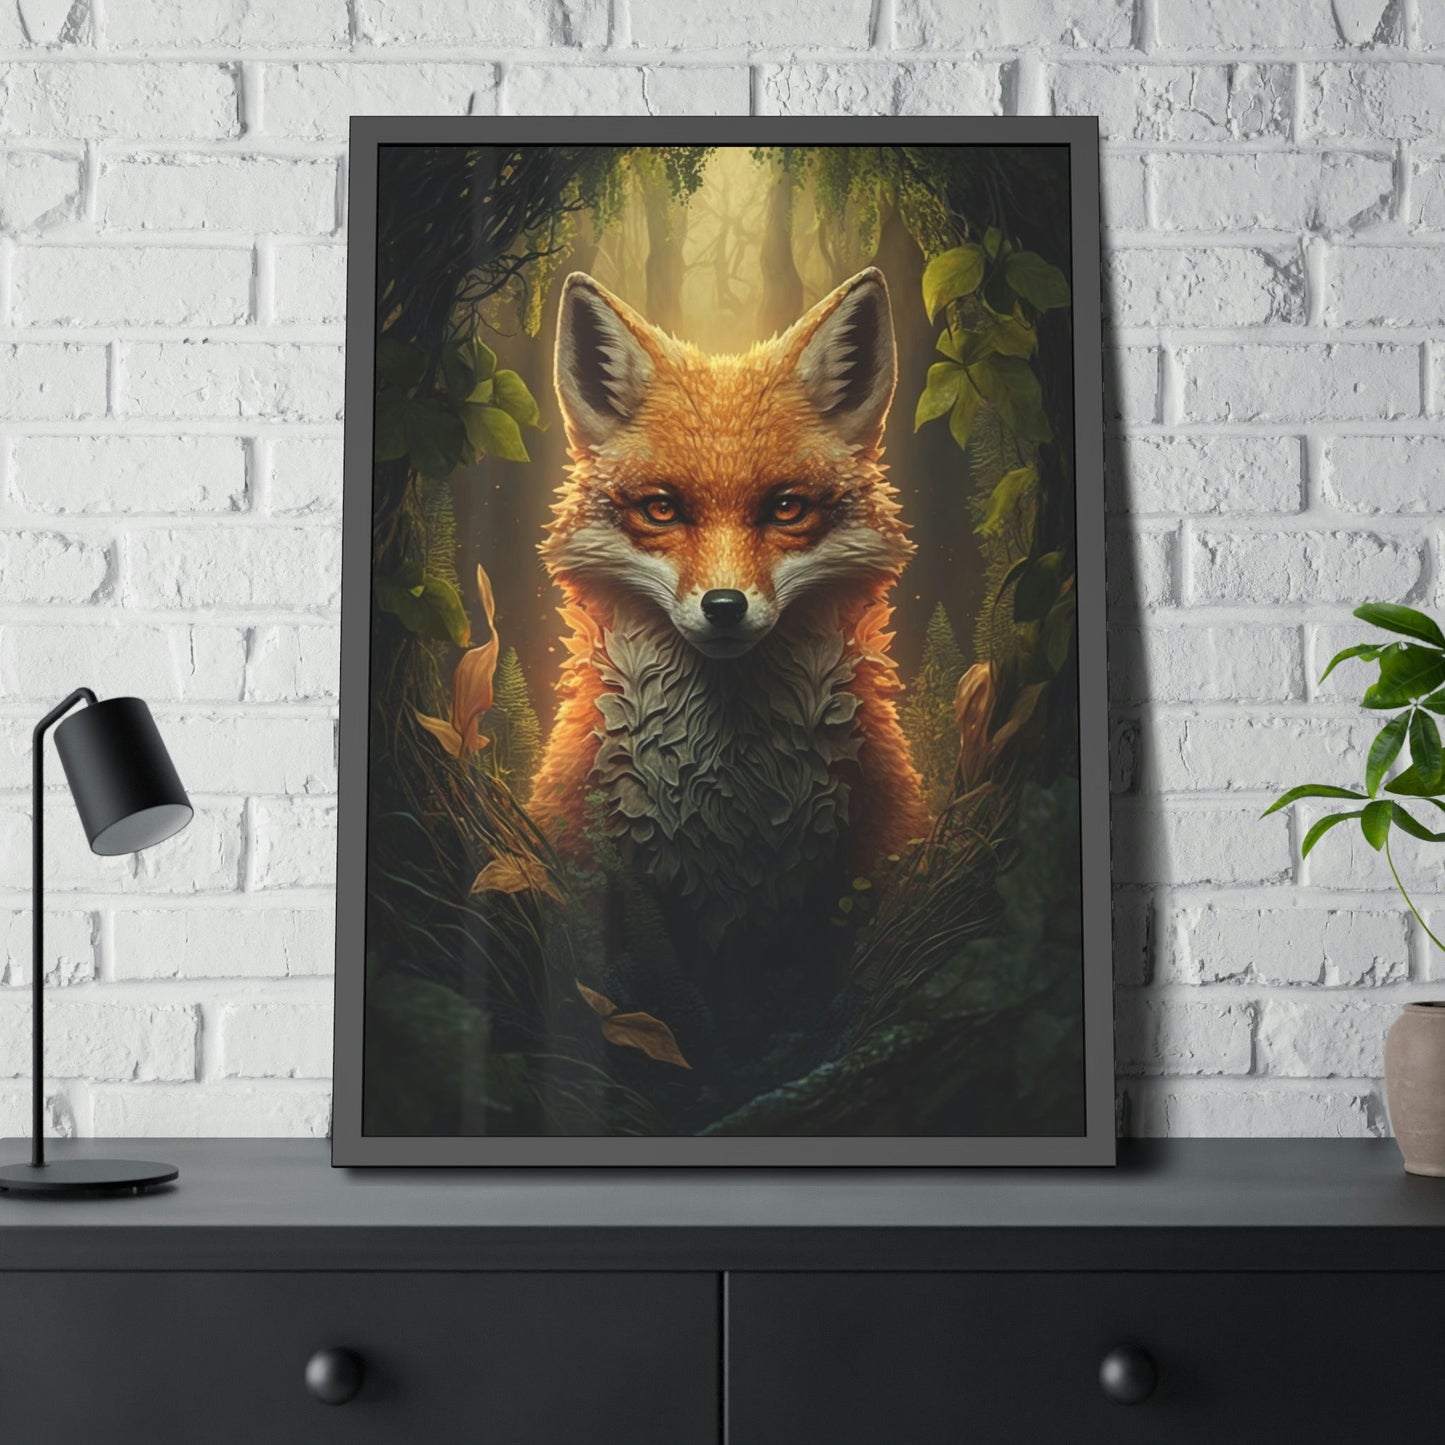 The Majestic Fox: A Proud Guardian of the Forest Realm